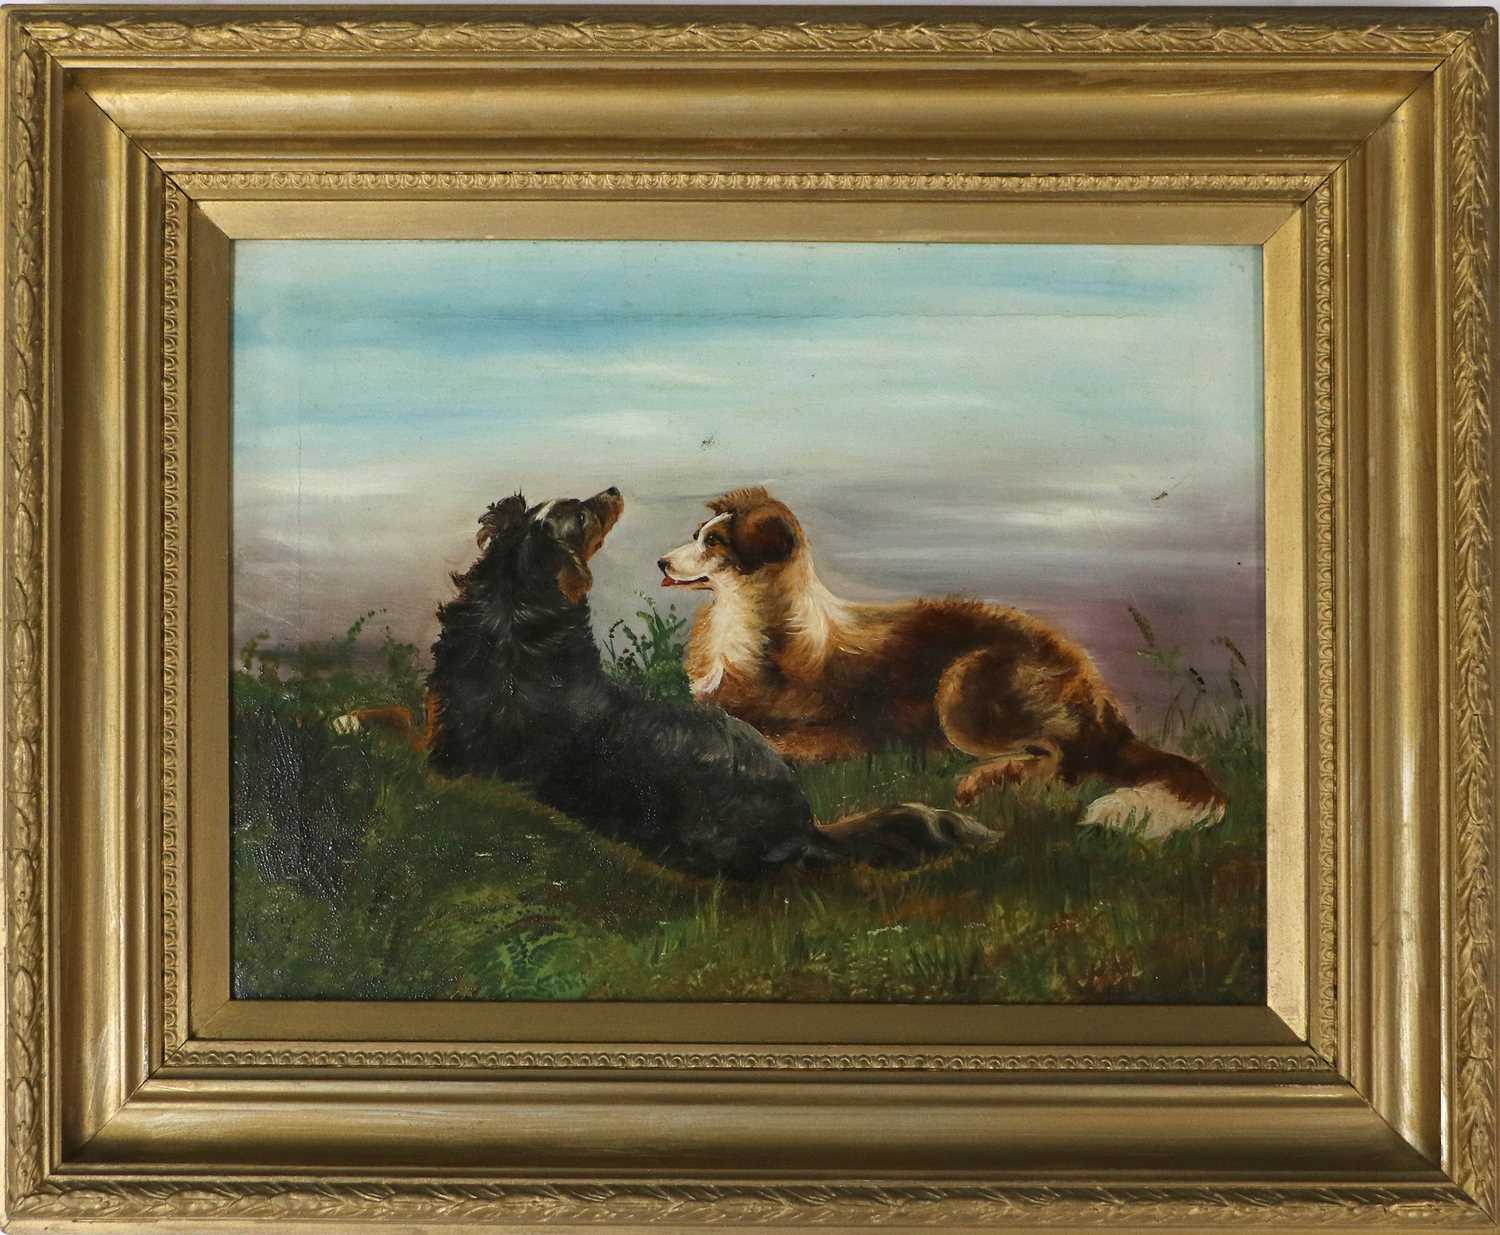 Follower of J Langlois (1855-1904) Two Collies resting in a field Oil on canvas, 26.5cm by 36cm - Image 3 of 3